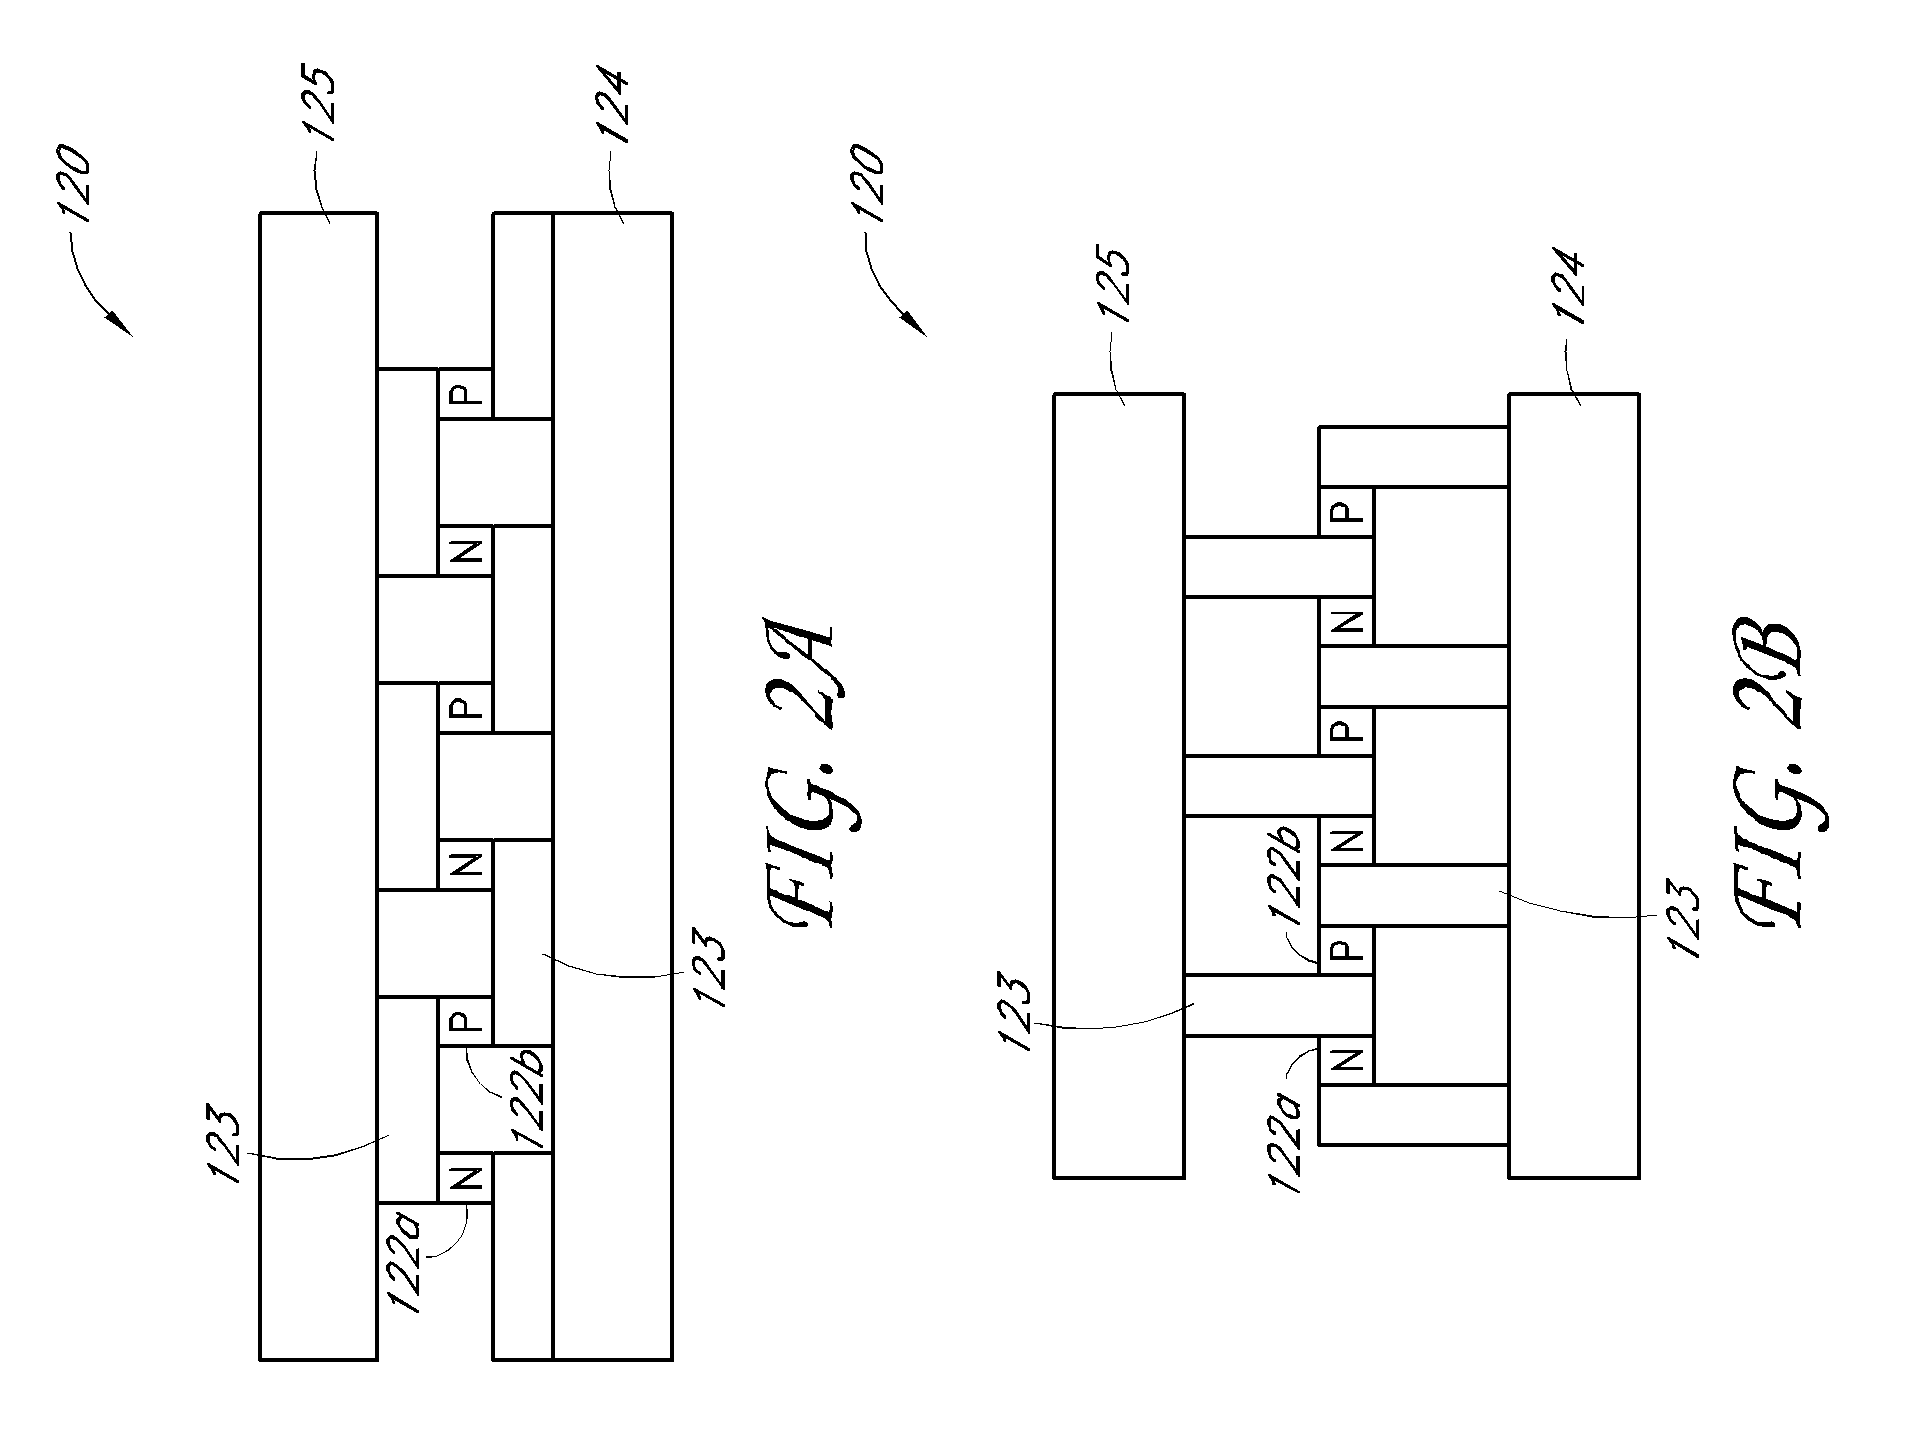 System and method for distributed thermoelectric heating and cooling